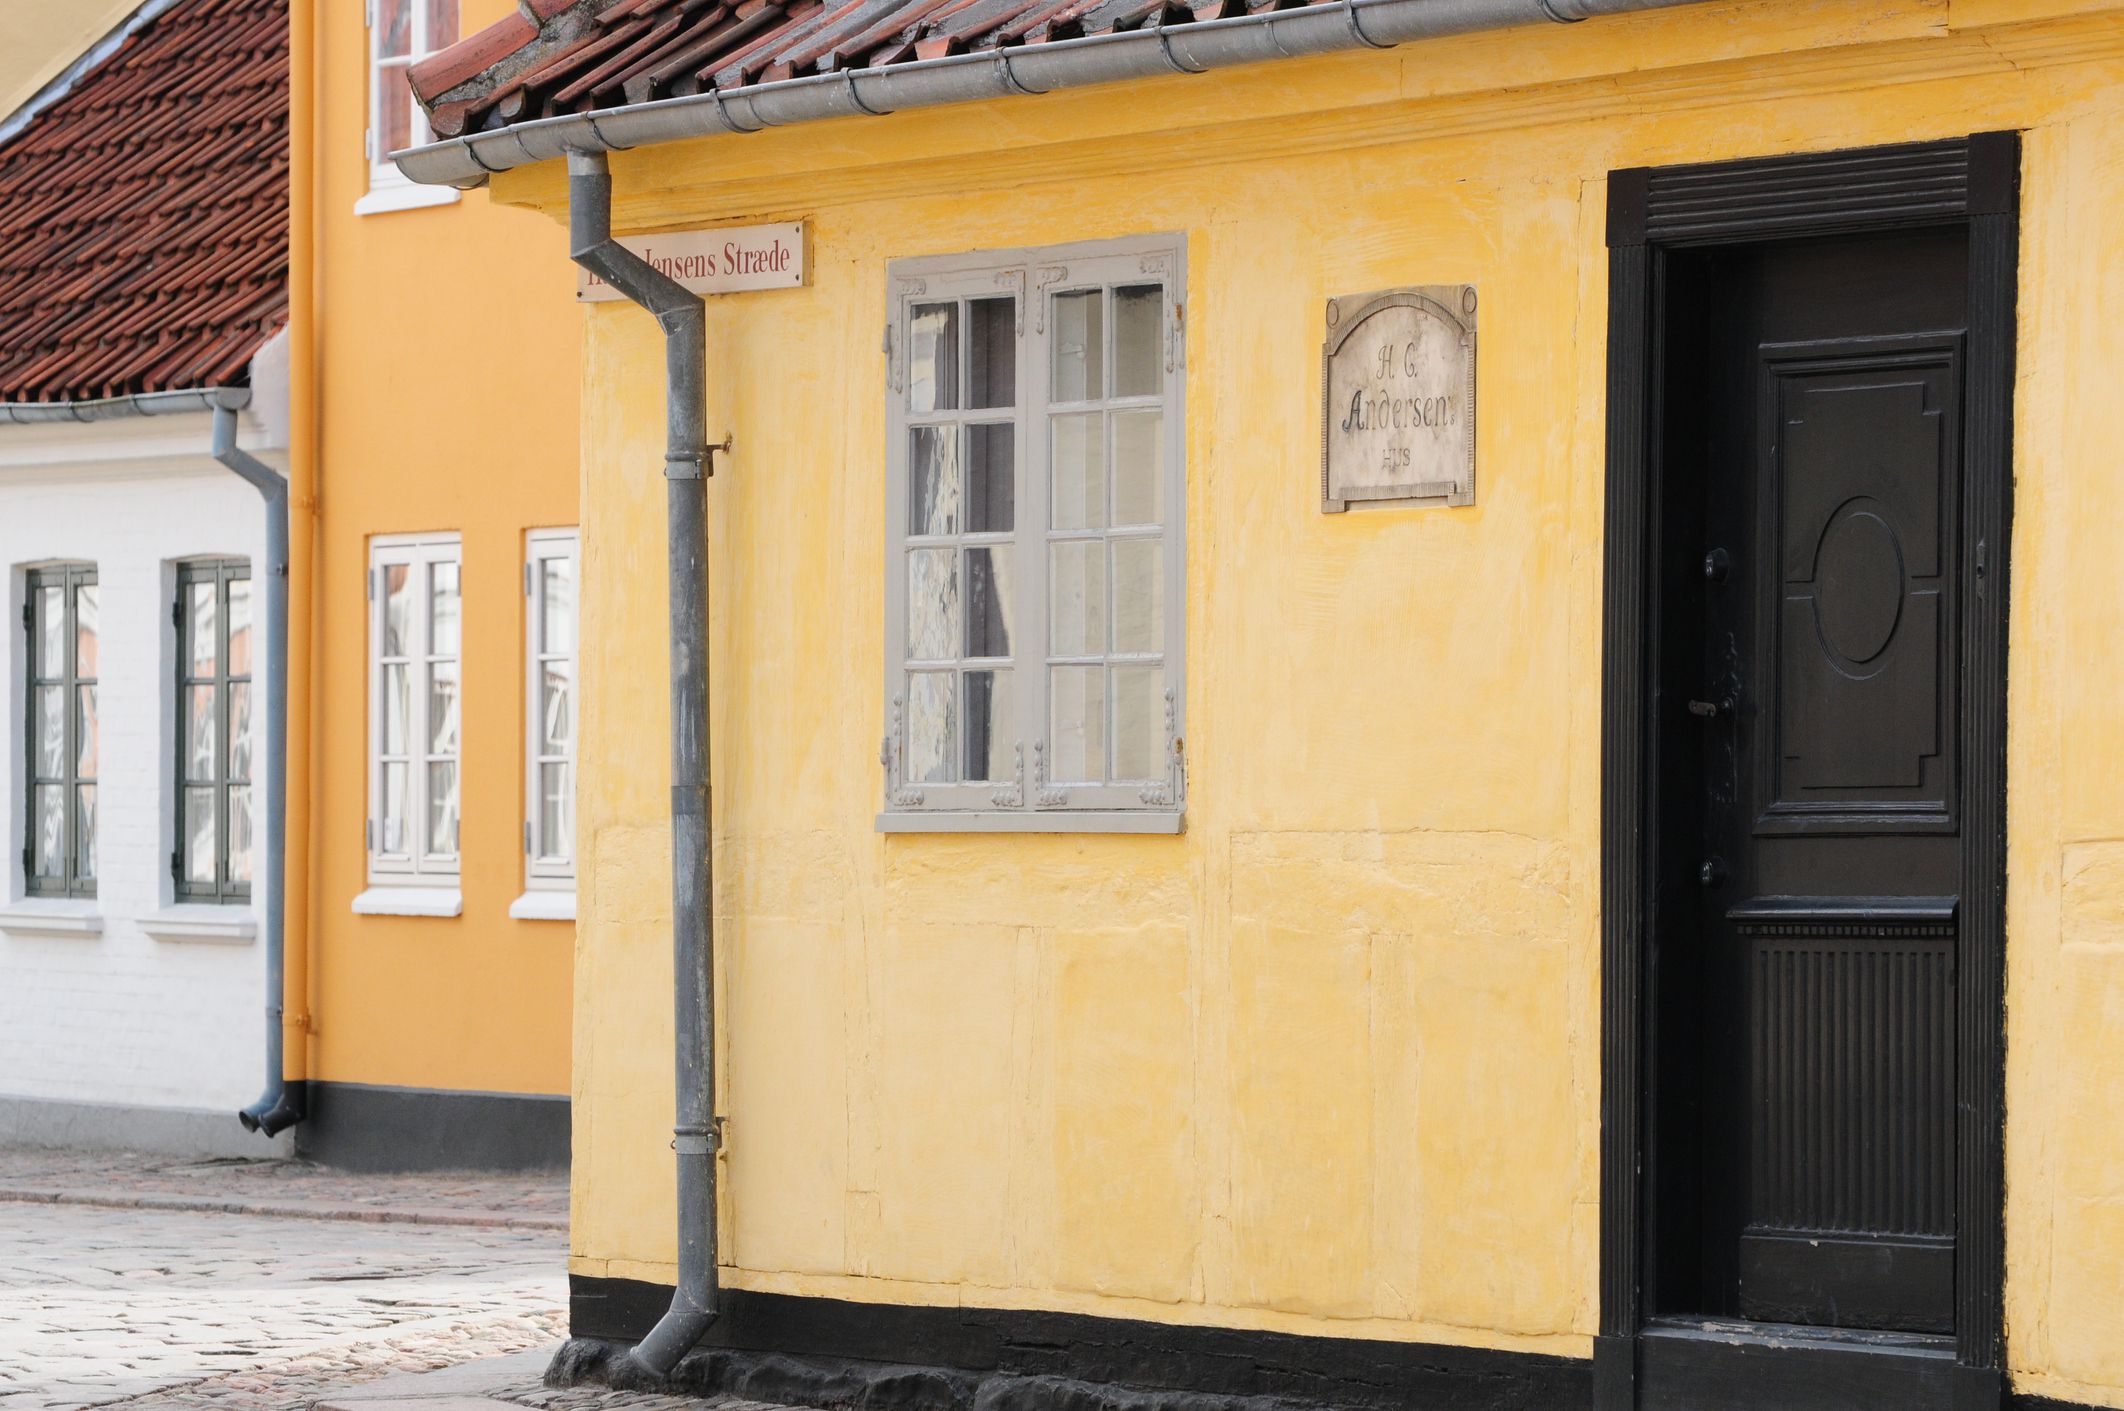 <p>Fans of Hans Christian Andersen may recognize this city, as it’s home to Andersen's, well, home. Besides this real-life fairy tale house, you’ll also fall in love with its colorful homes, cobblestone streets and quaint local shops and restaurants.</p>